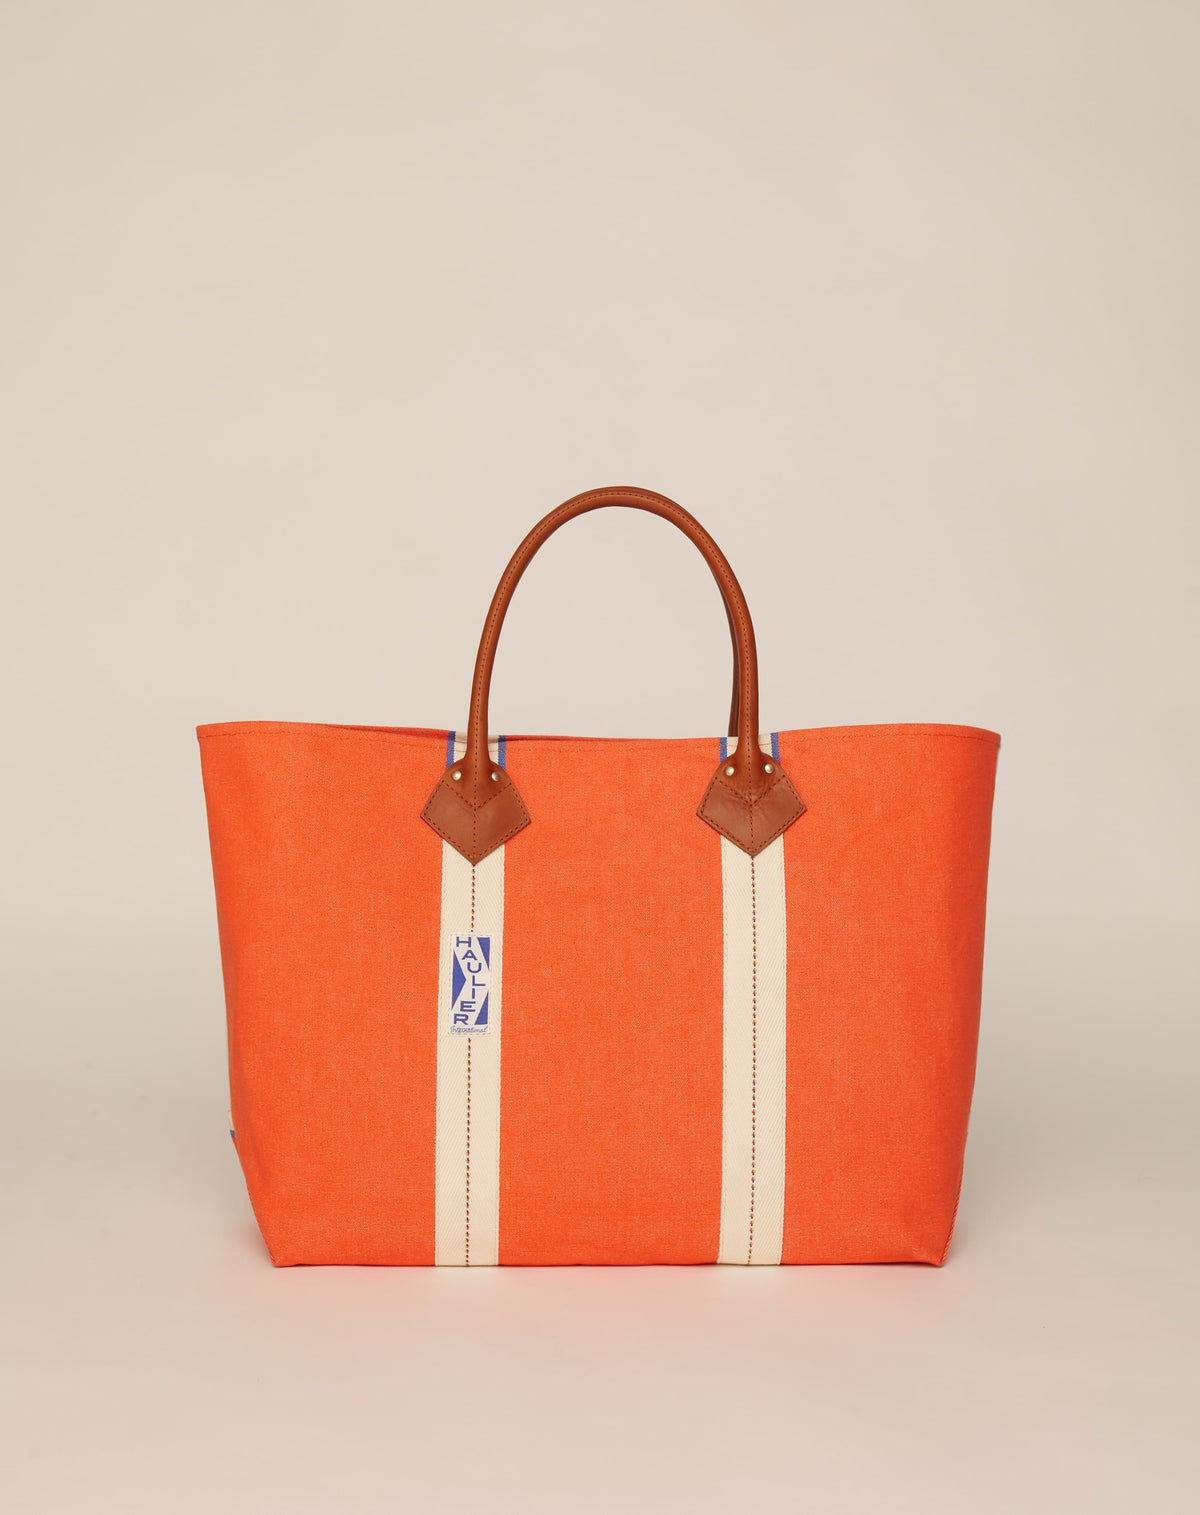 Image of classic canvas tote bag in bright orange colour with tan leather handles and contrasting natural ecru stripes.